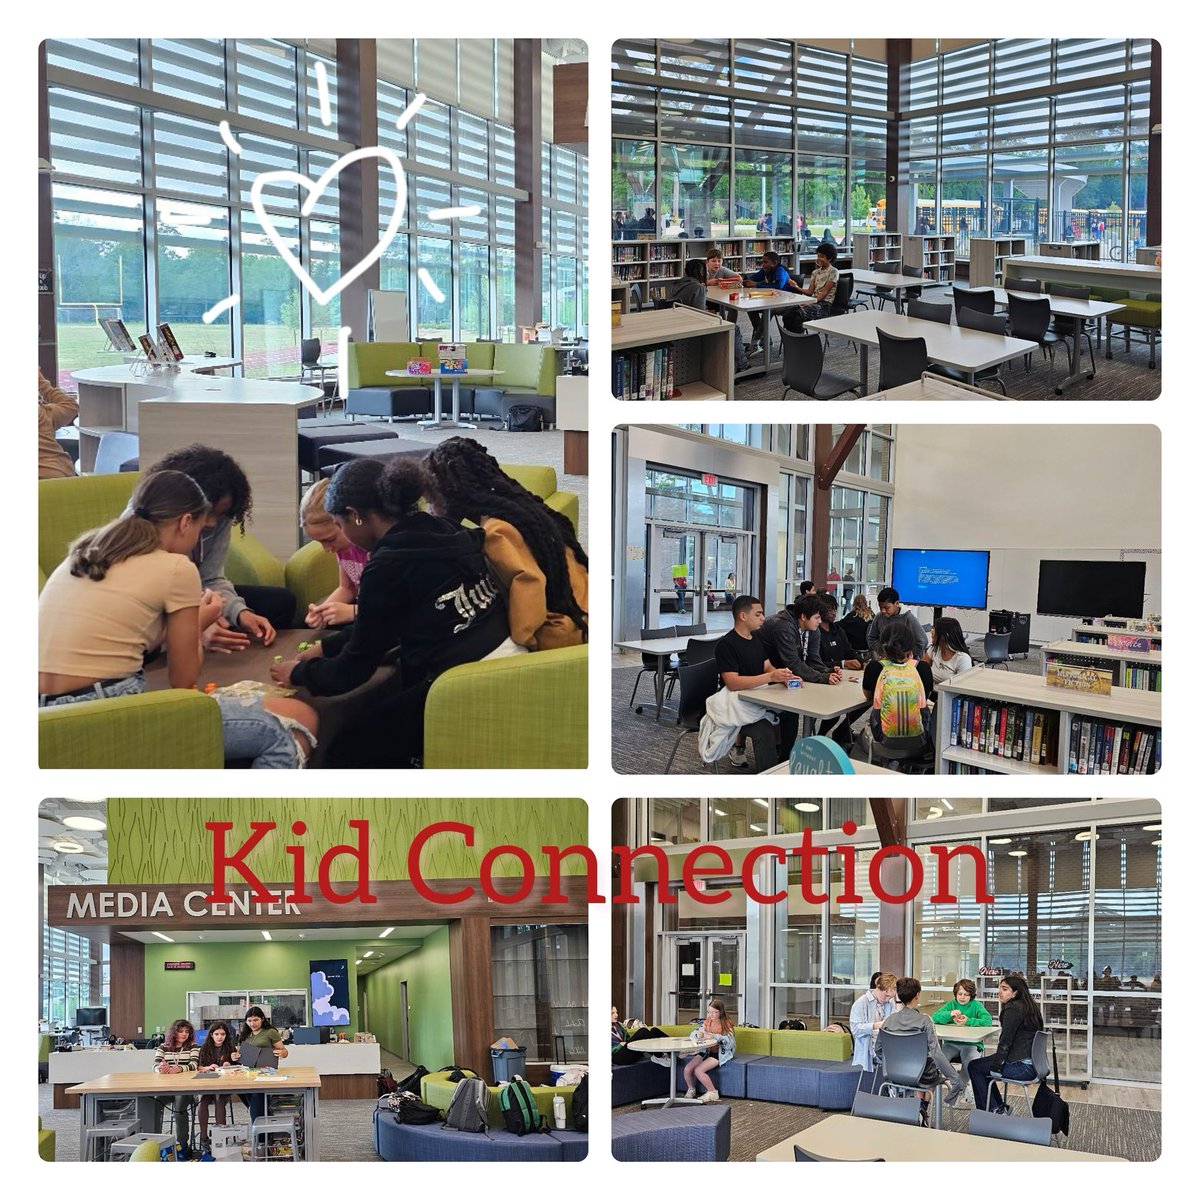 Near or far…we make our way back to the @TheKMSLibrary every Wednesday for Kid Connection 🎲🃏♥️ #KMSCougarPRIDE @HumbleISD_KMS #KMS1ofaKIND @mrs_kmsconsel @cwoottie @Mrs_MercedesF